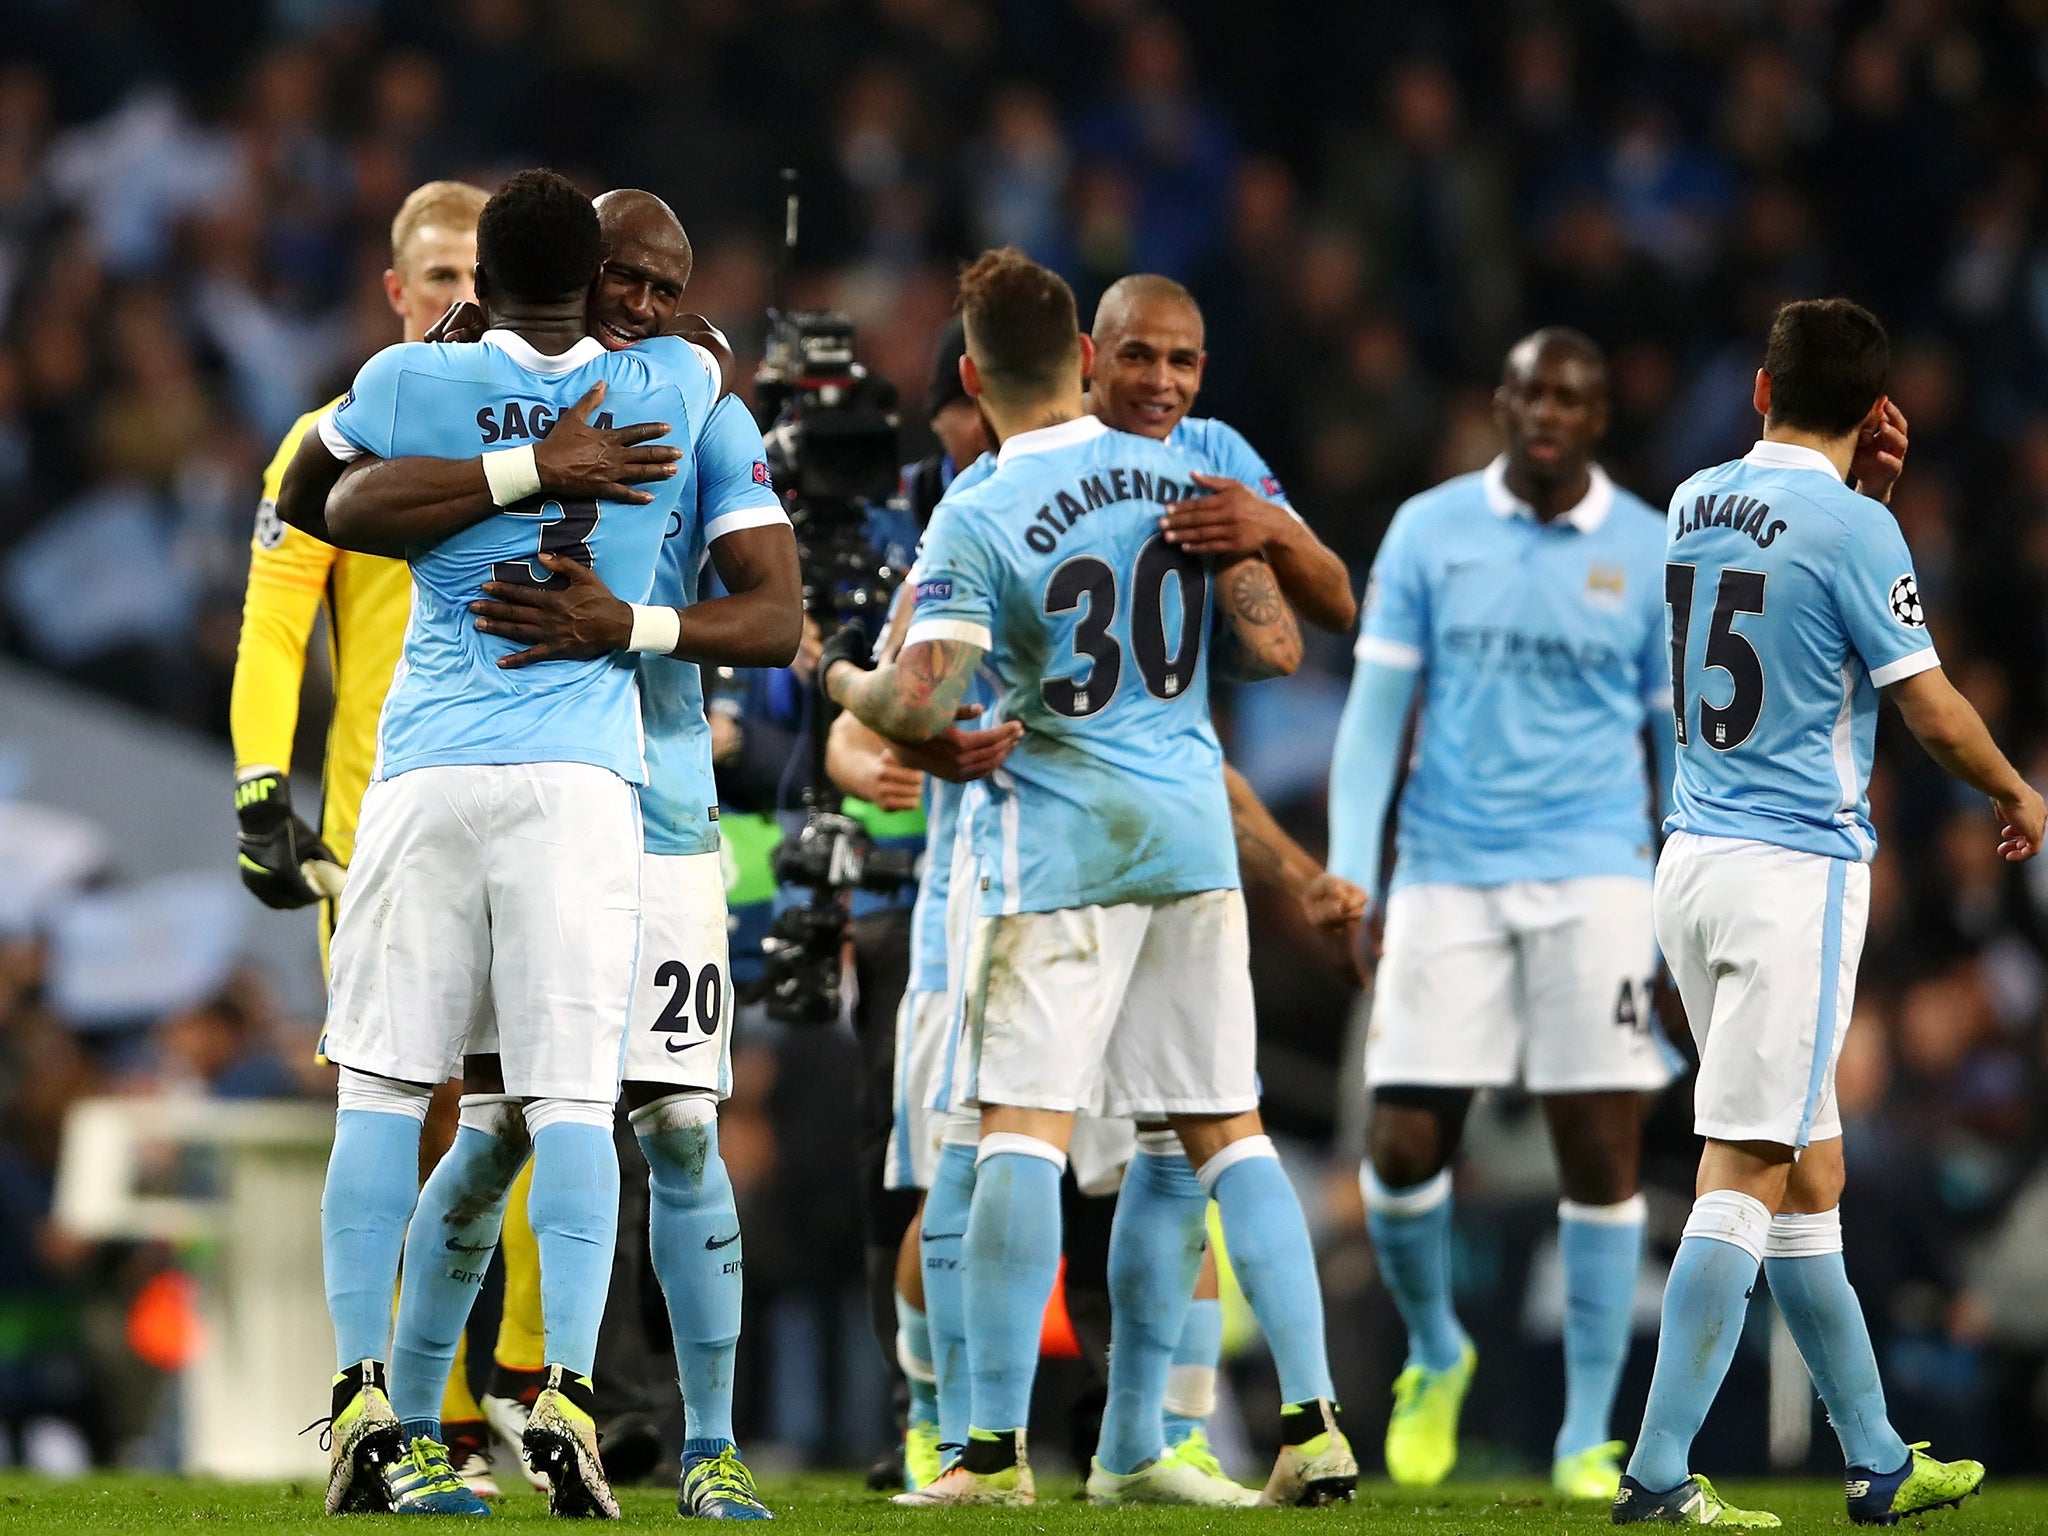 Manchester City's players celebrate reaching the semi-finals